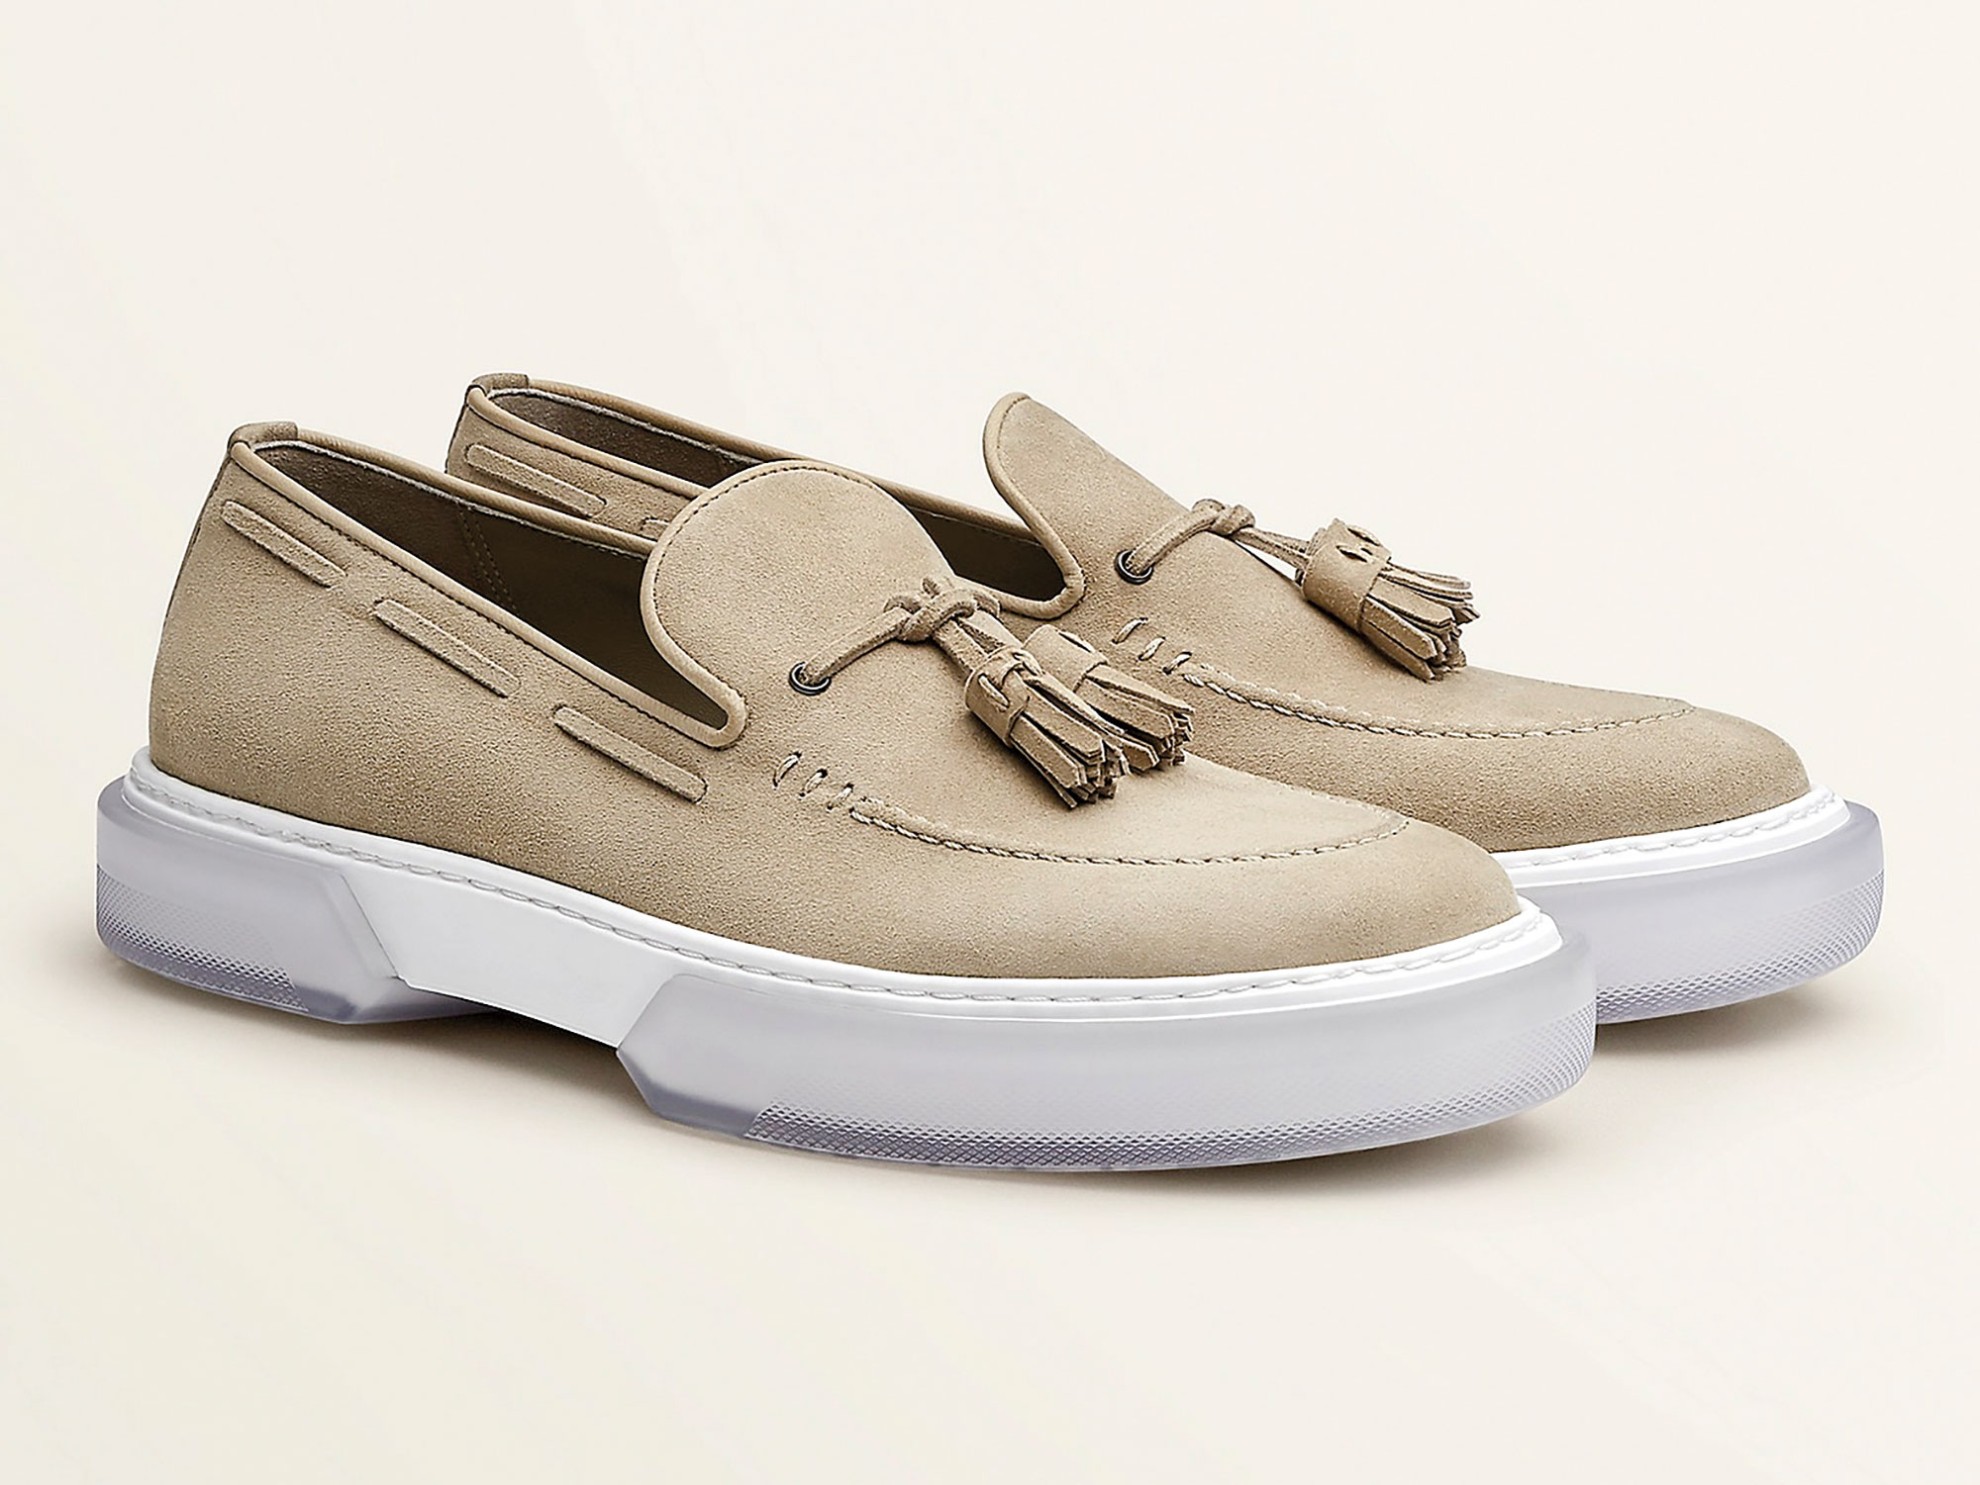 Casual moccasins: Relaxed and comfortable